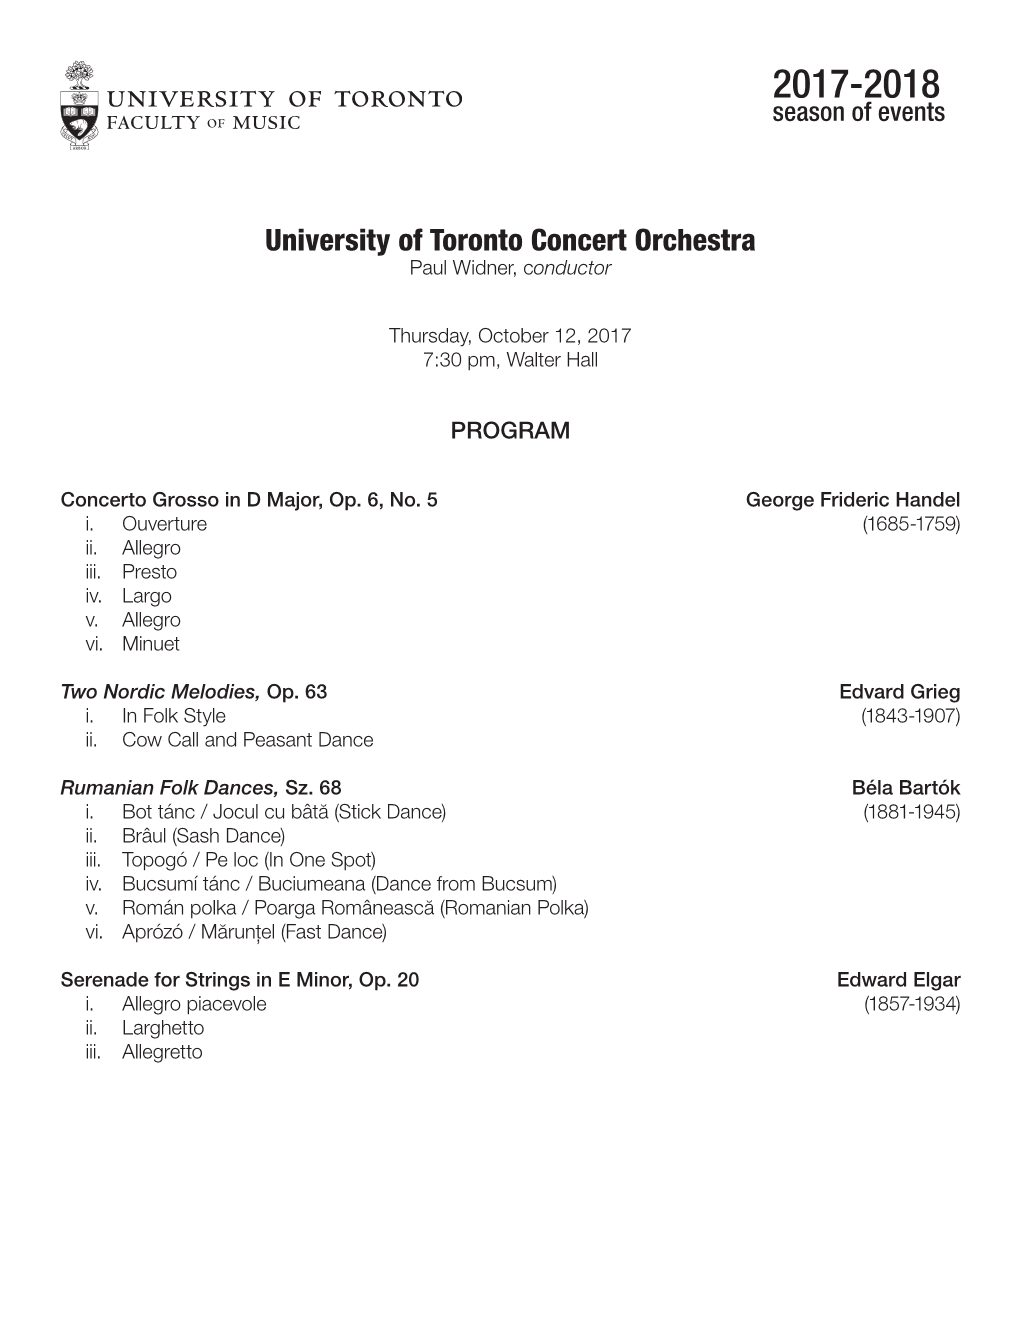 University of Toronto Concert Orchestra Paul Widner, Conductor